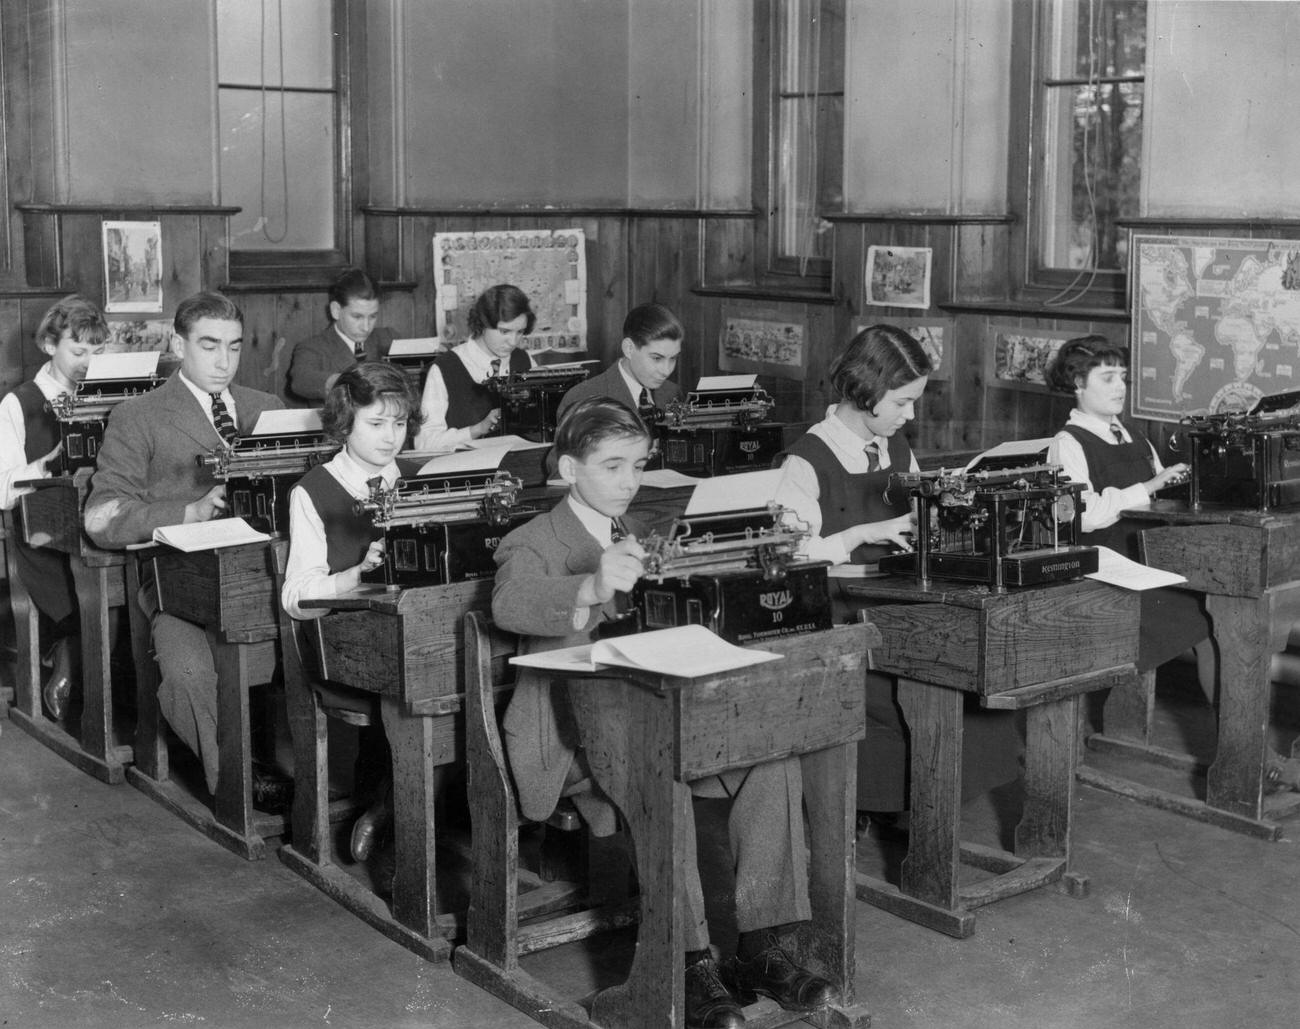 Typing class at Licensed Victuallers School, Slough, Buckinghamshire, December 1935.